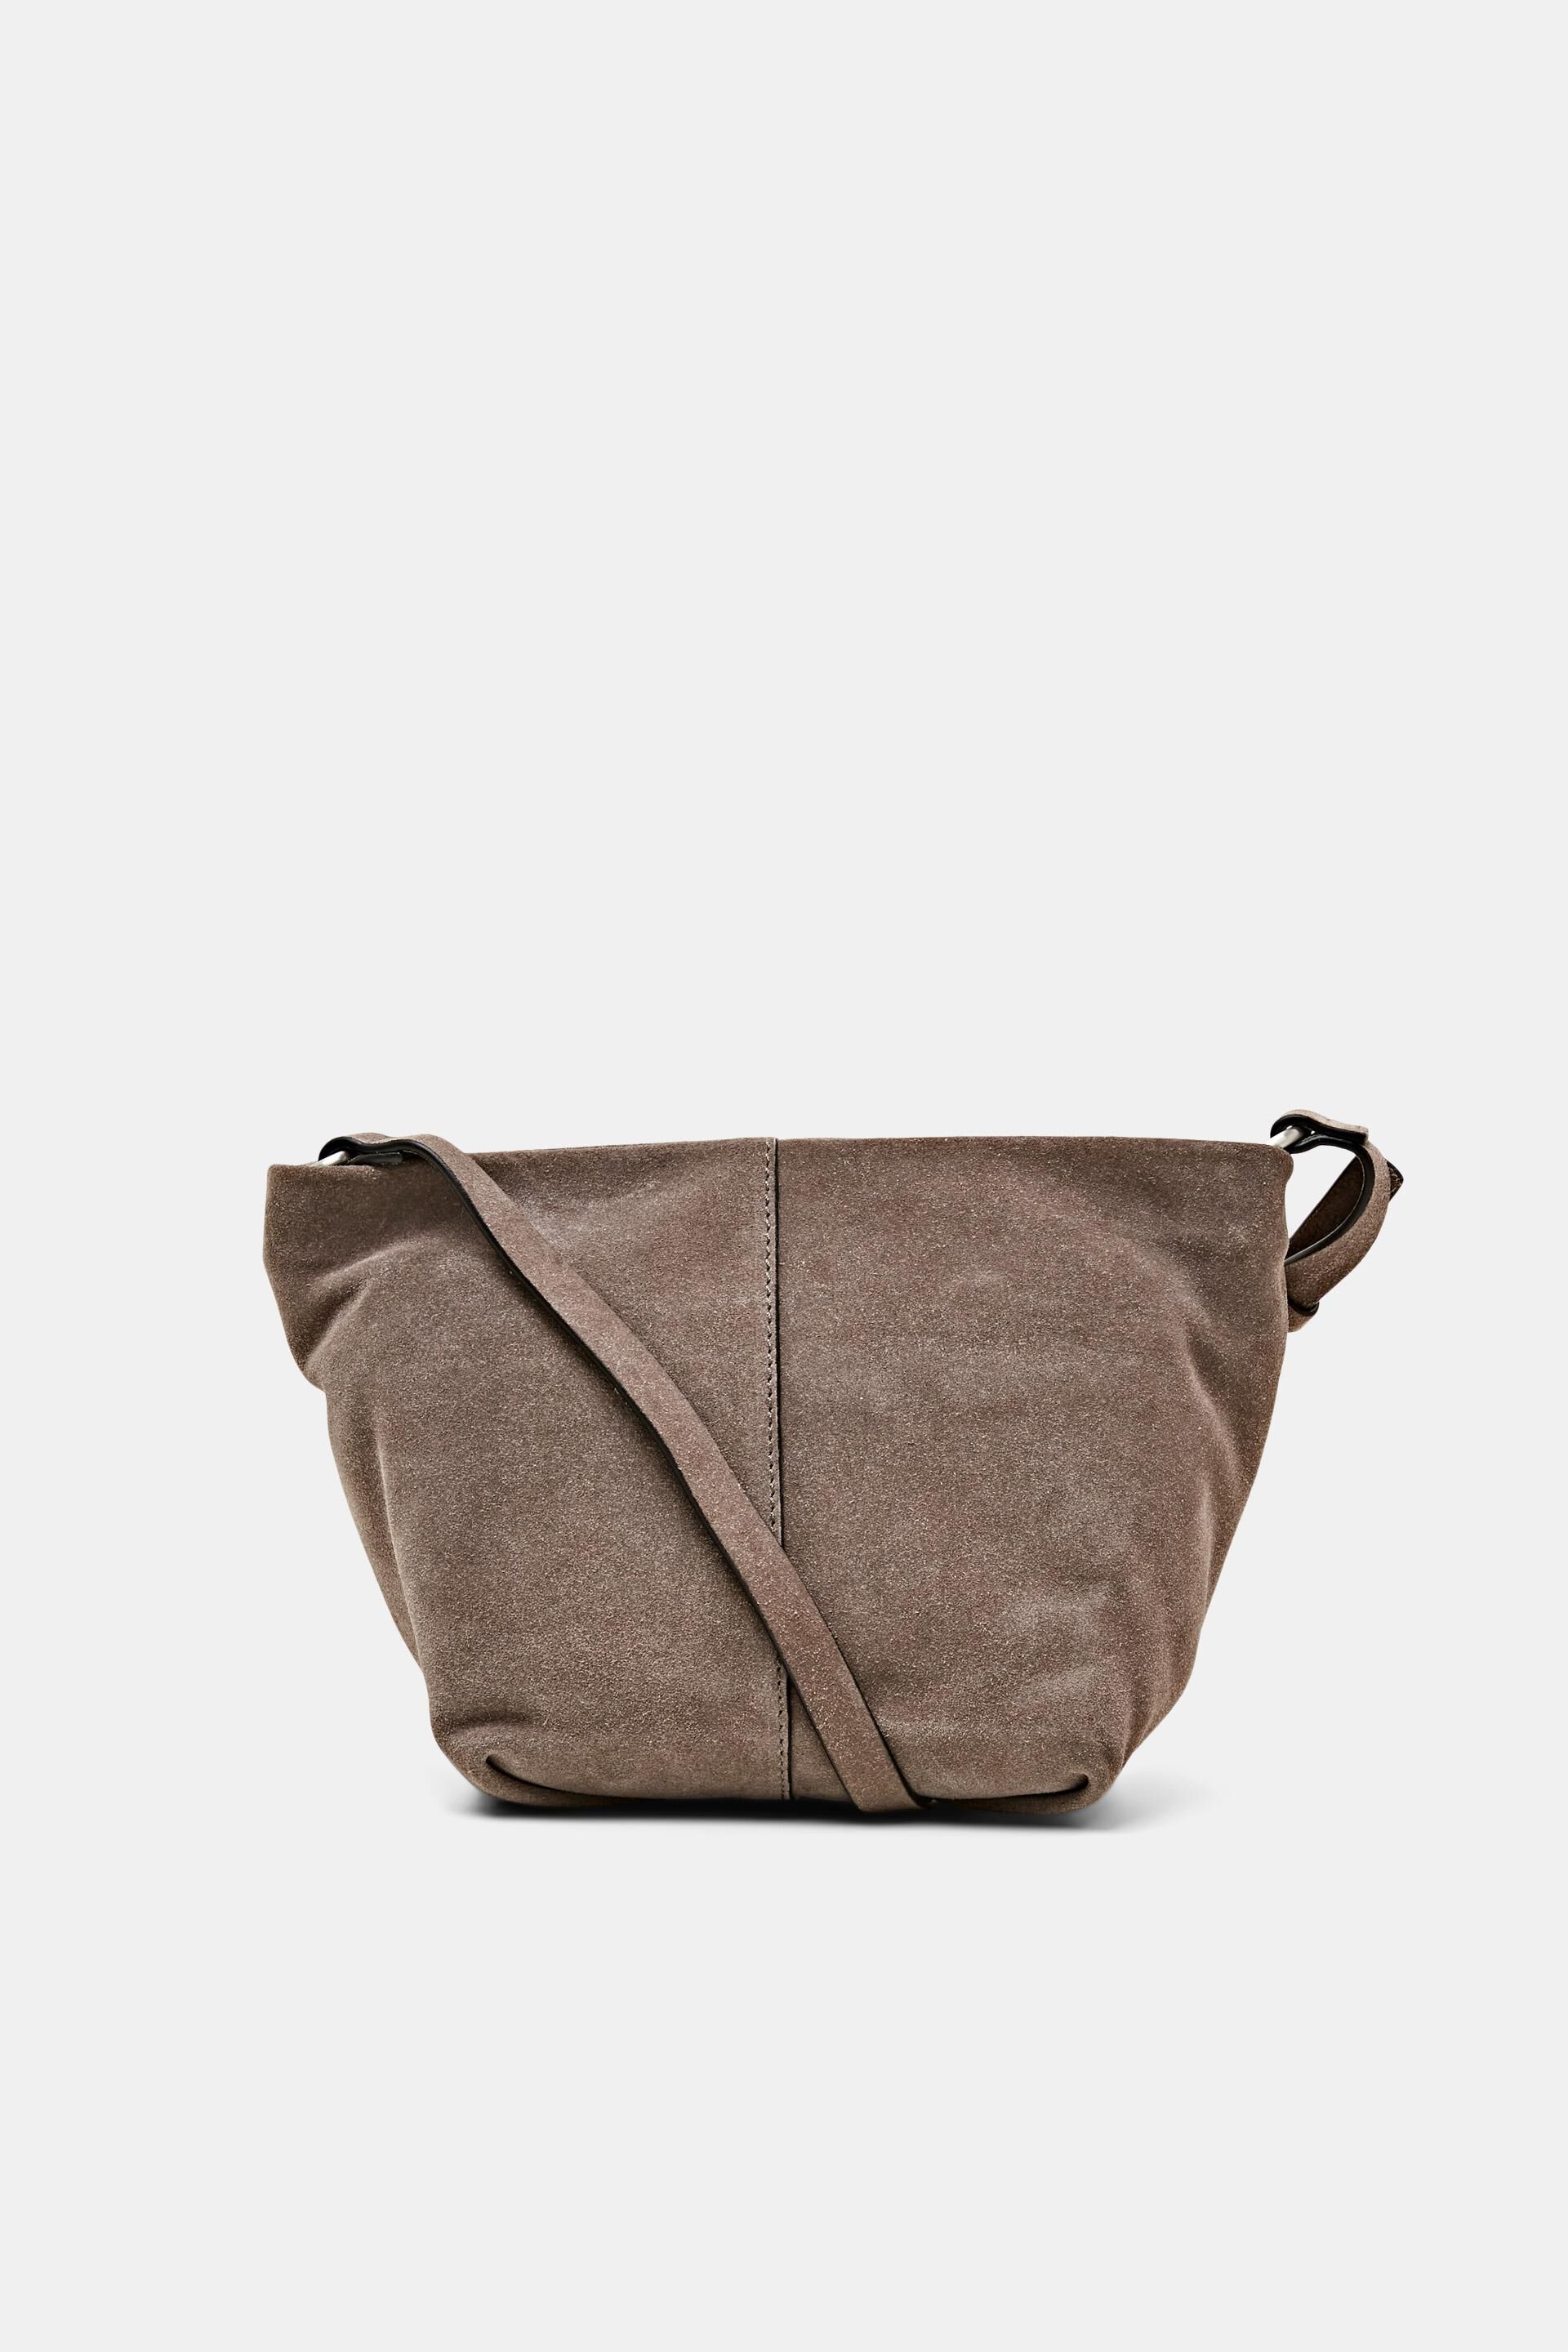 Esprit Online Store Bags leather